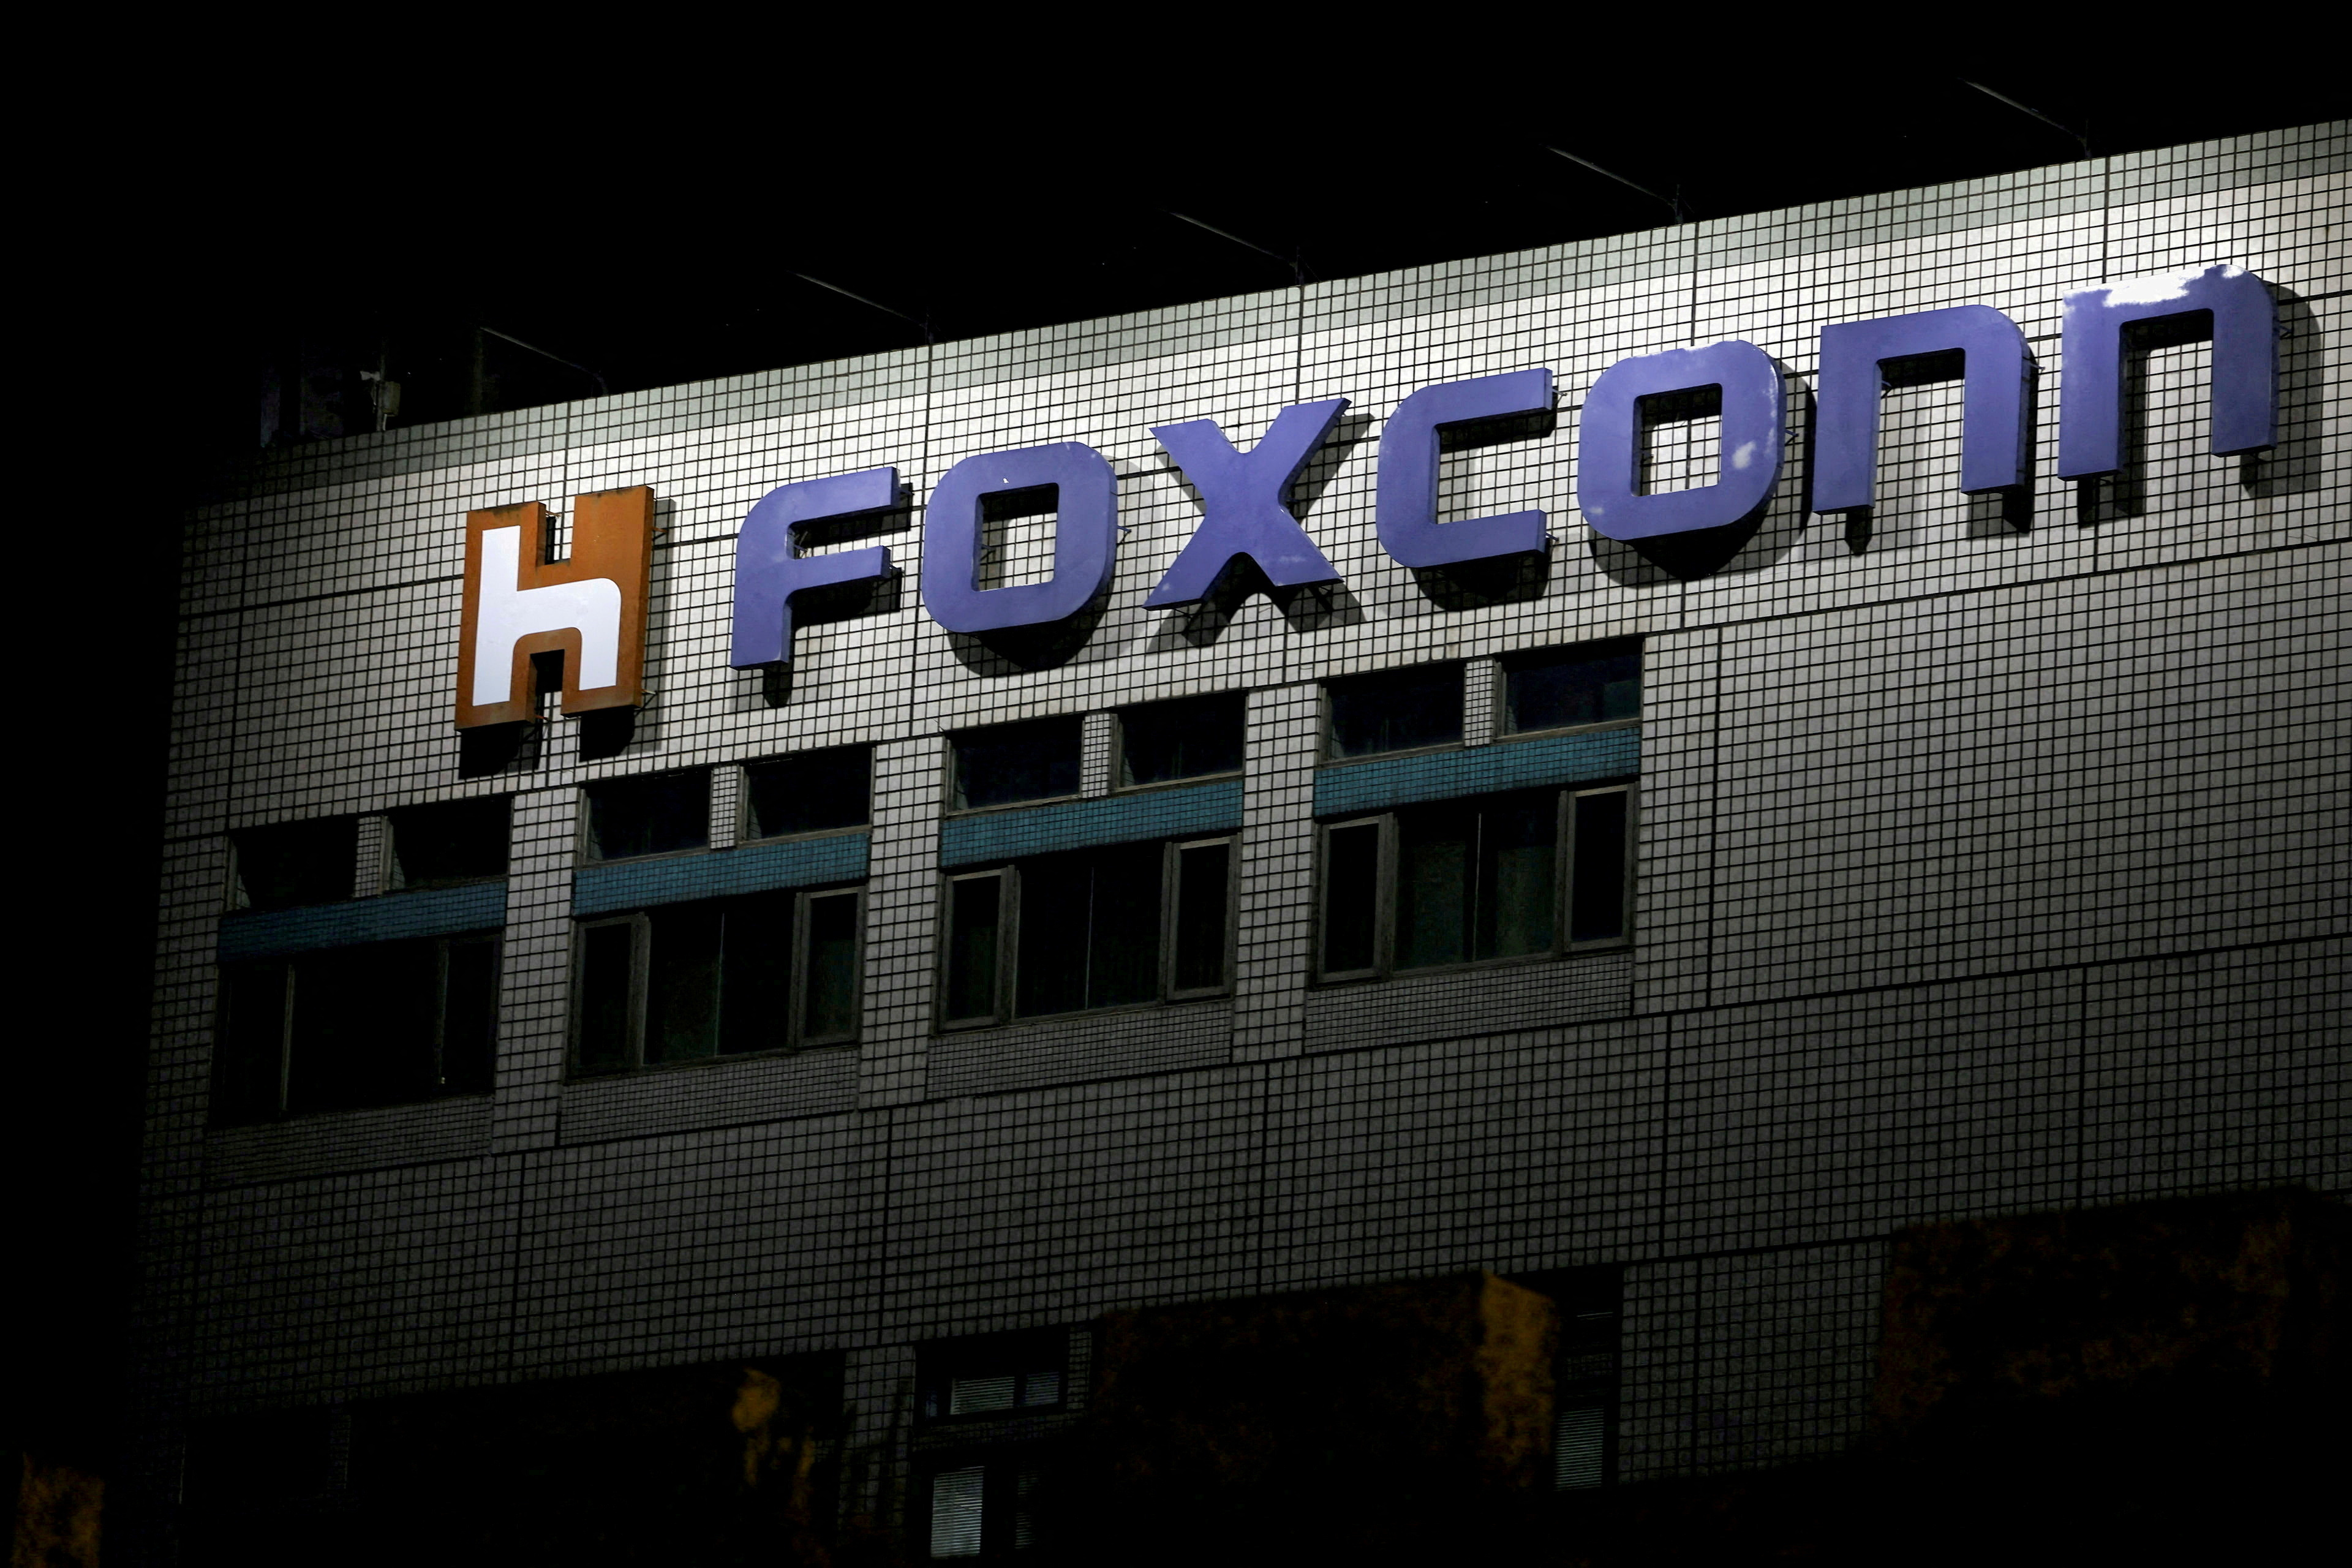 The logo of Foxconn is seen outside a building in Taipei